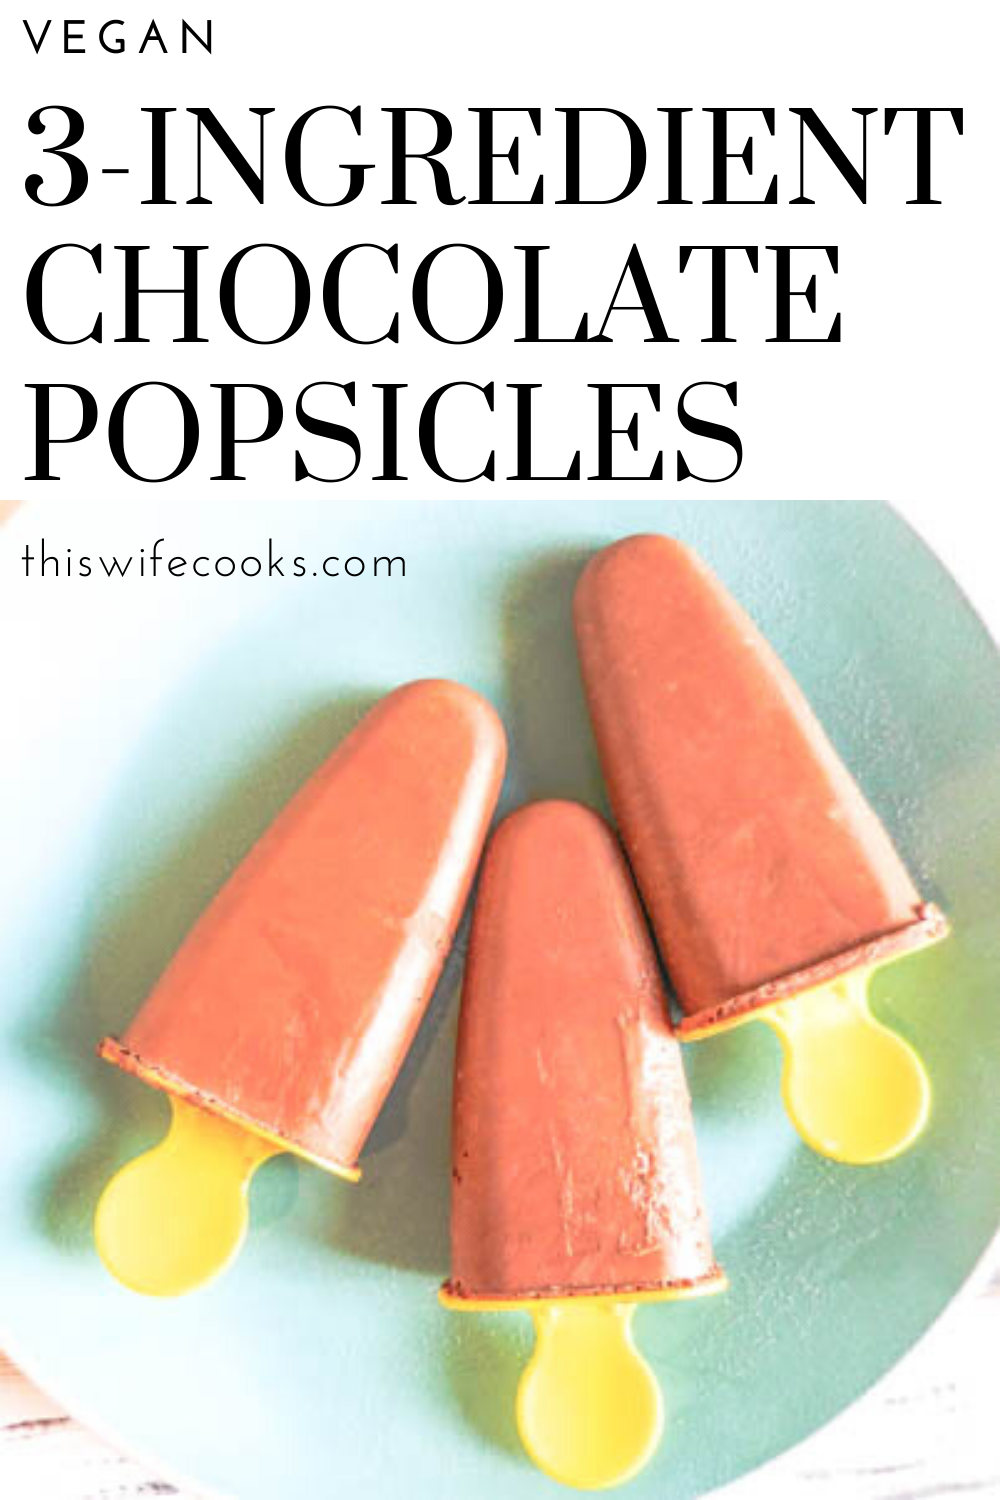 3-Ingredient Vegan Chocolate Popsicles - These popsicles received two-thumbs up from the kids. And there's even a secret, high protein ingredient! via @thiswifecooks